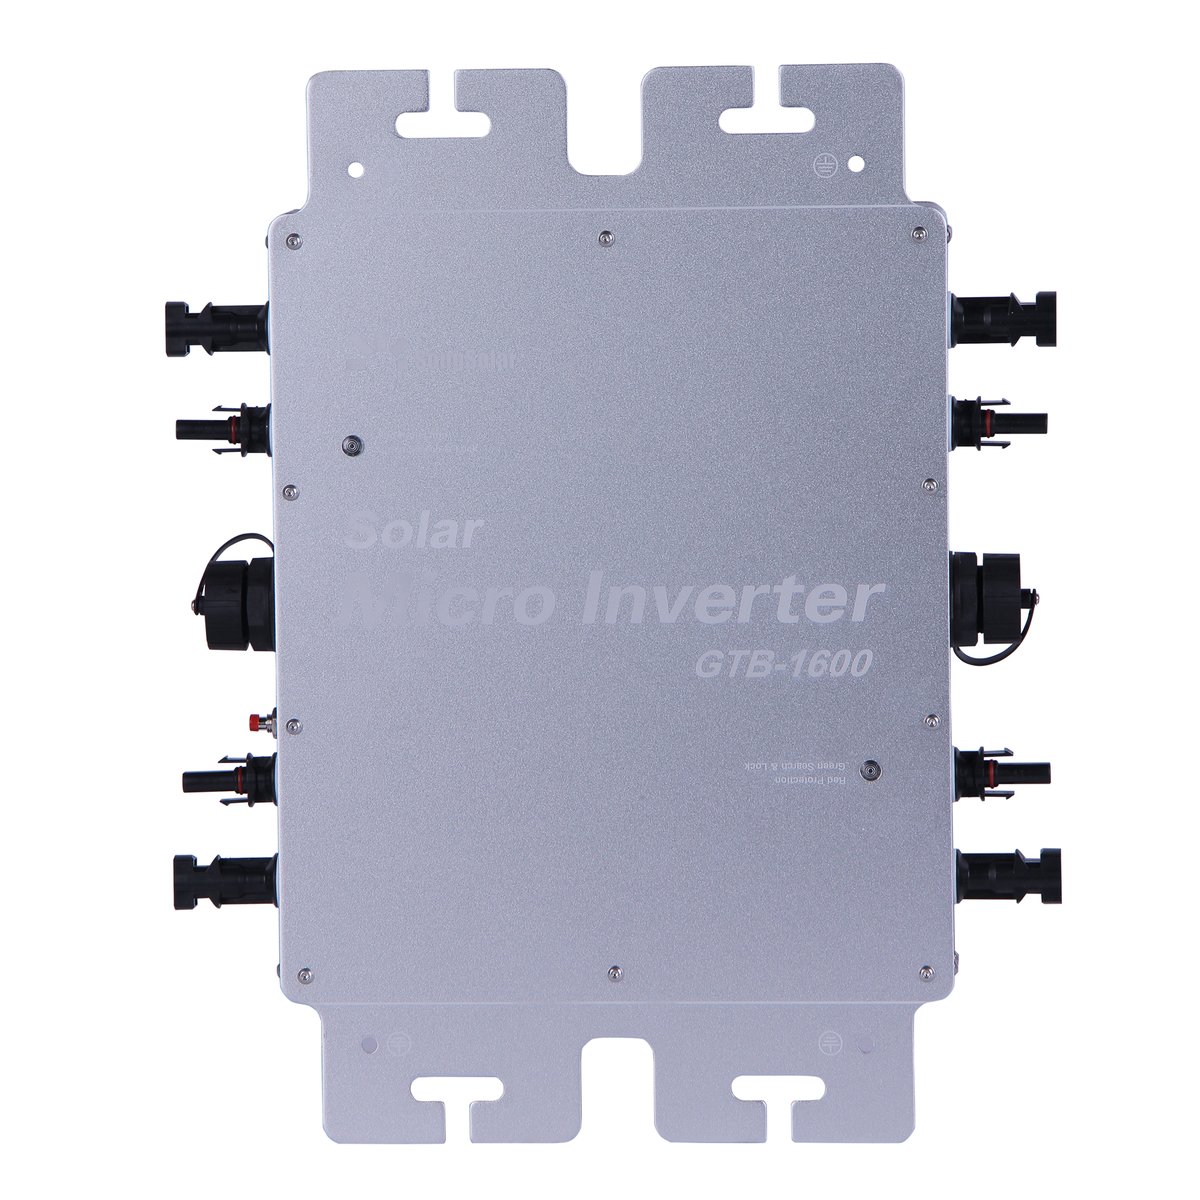 Micro-inverter for on-grid solar system.

The power is from 300W to 2800W. 

Email: info@solar3s.com
solar3s.com

#solarpanels

#solarPVsystem

#microinverter

#ongridsolarsystem